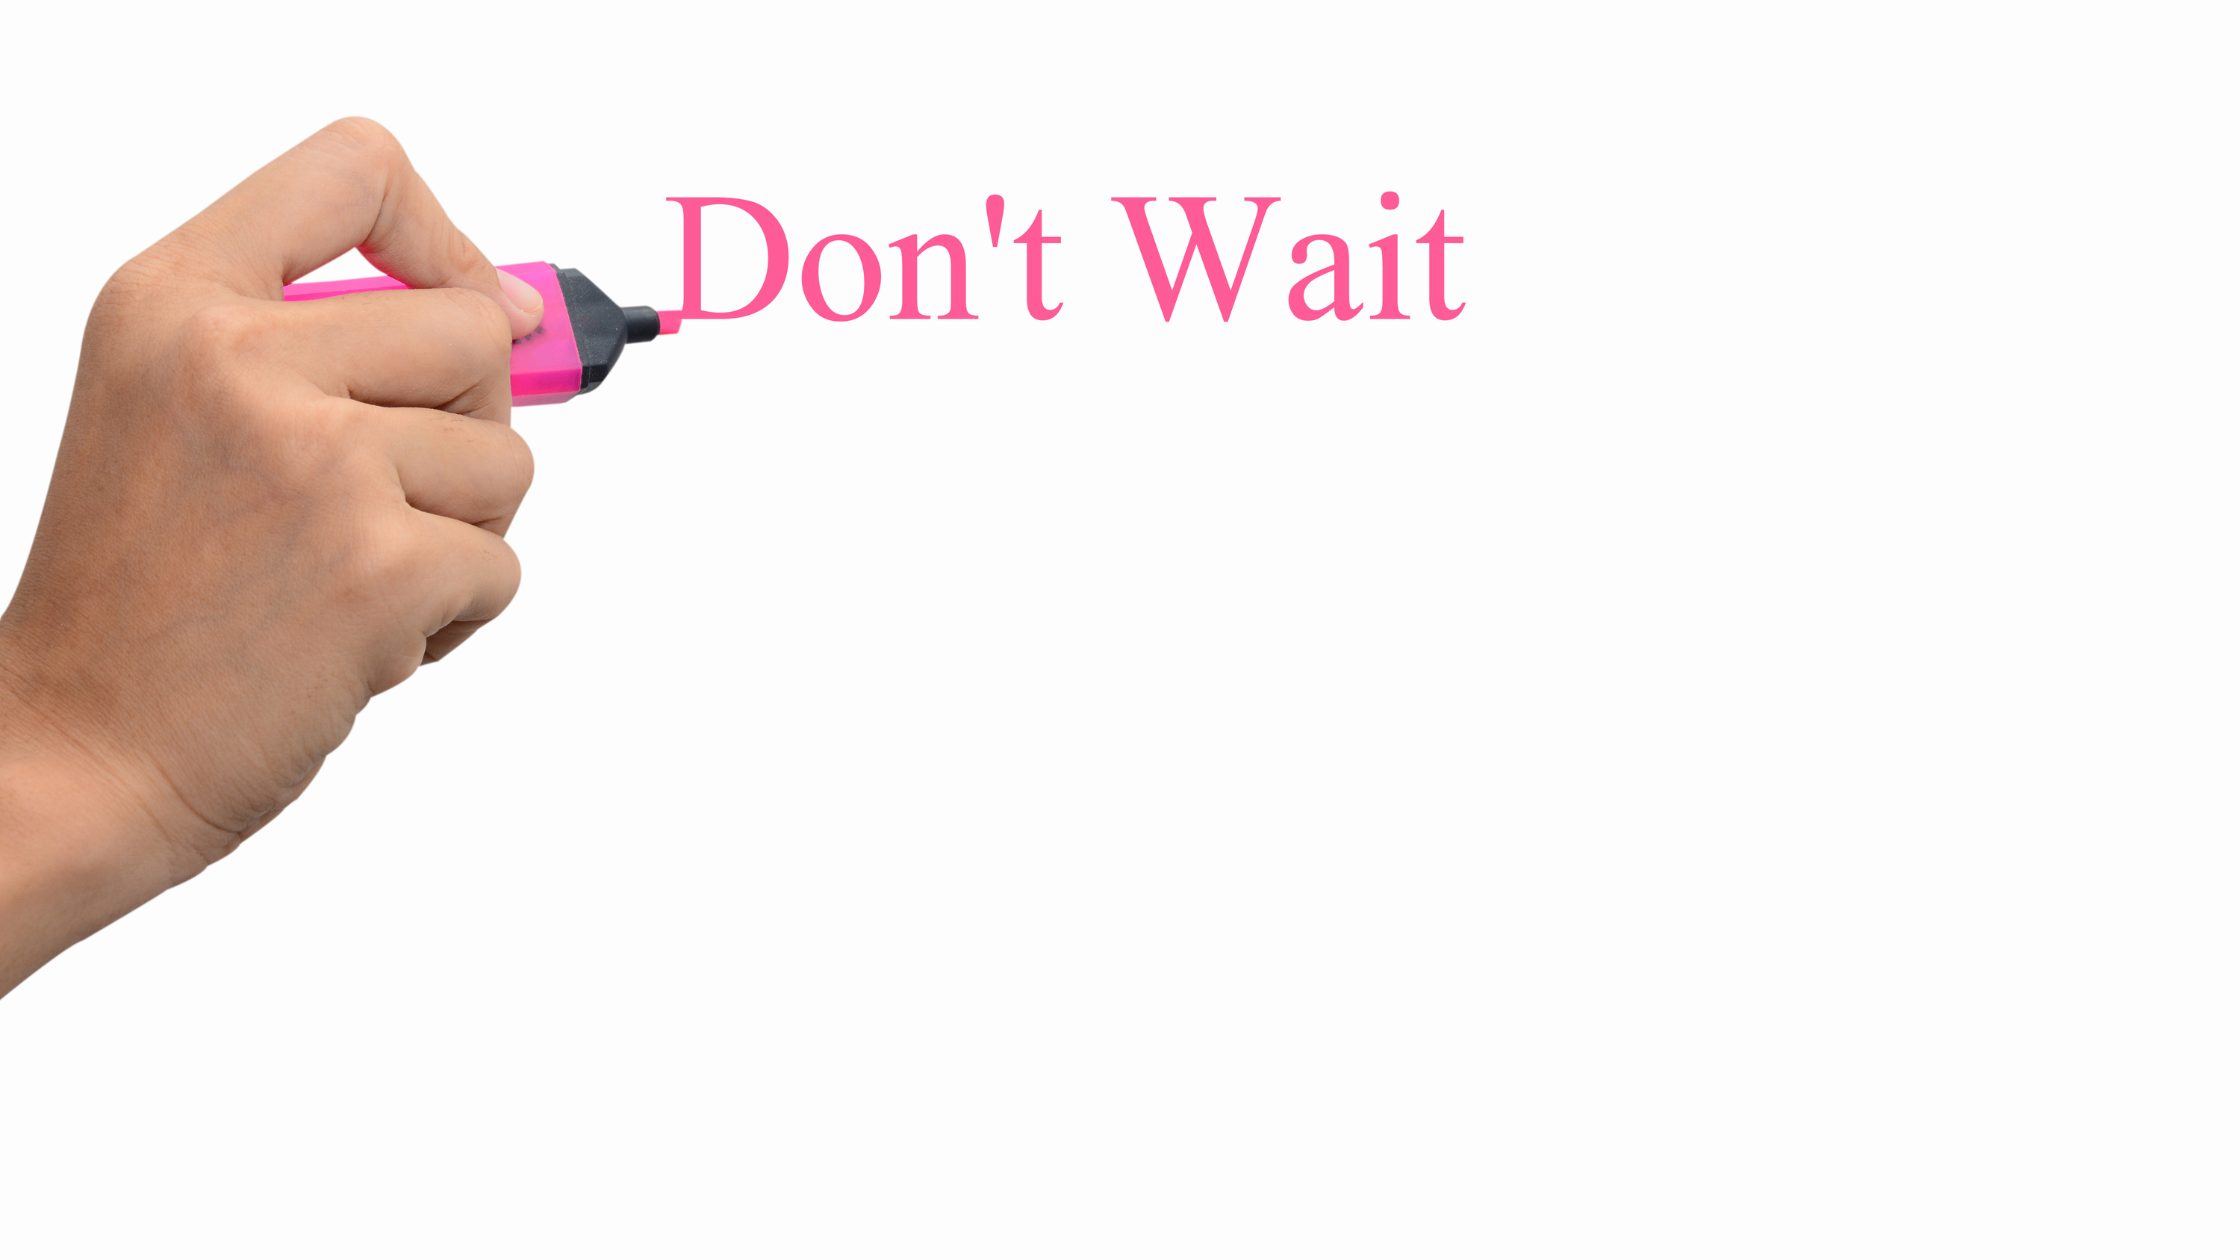 human hand writing "don't wait" in pink highlighter